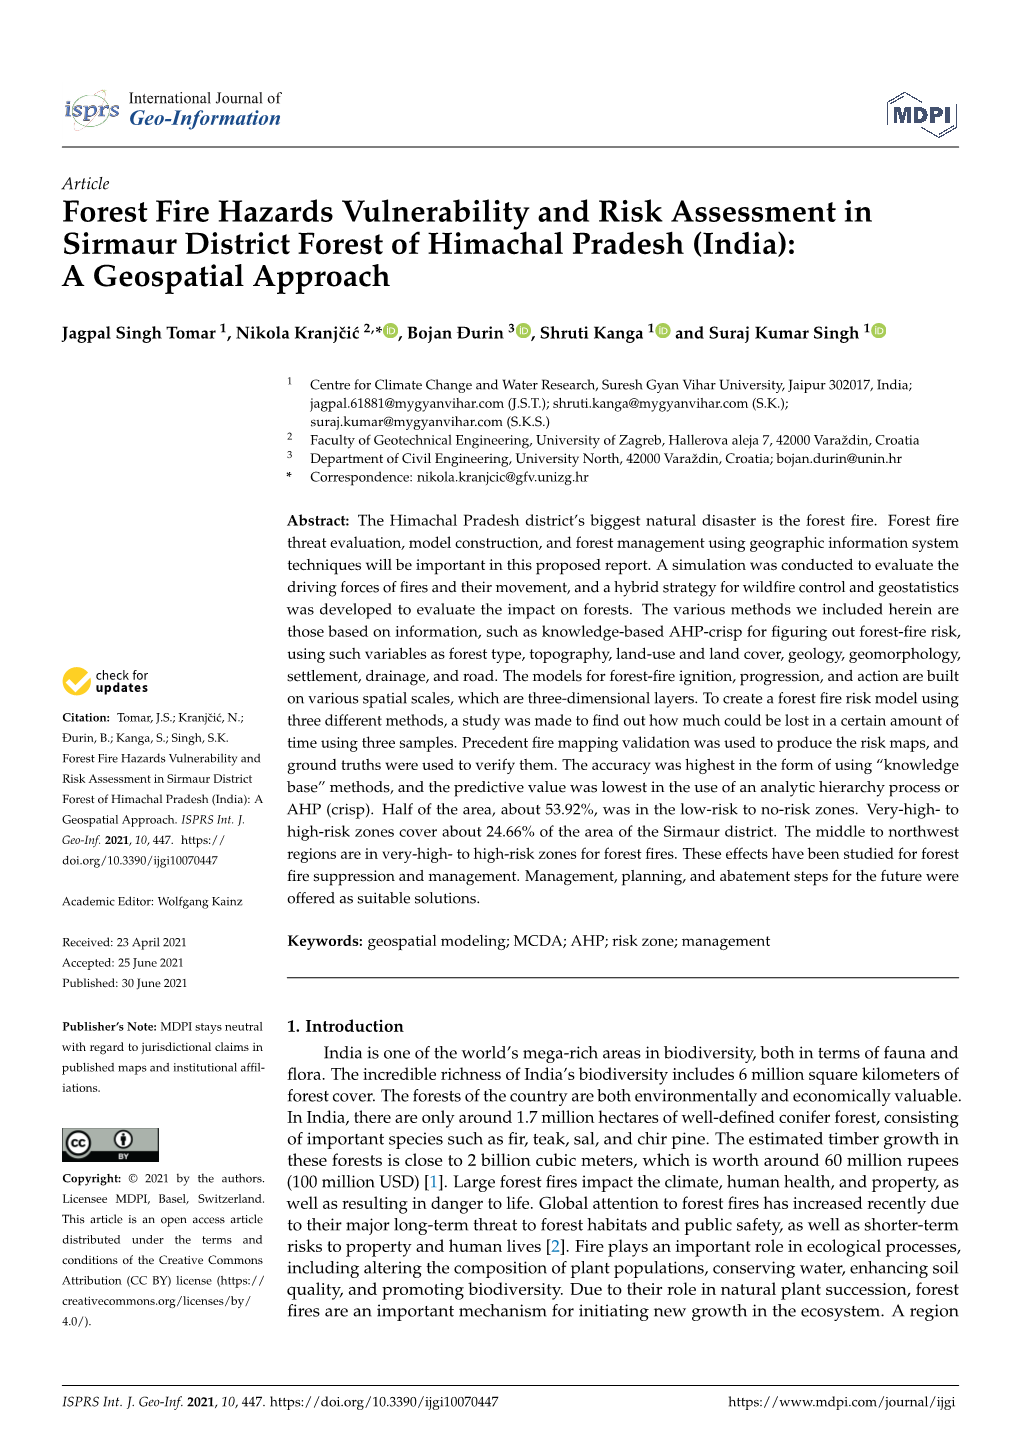 Forest Fire Hazards Vulnerability and Risk Assessment in Sirmaur District Forest of Himachal Pradesh (India): a Geospatial Approach